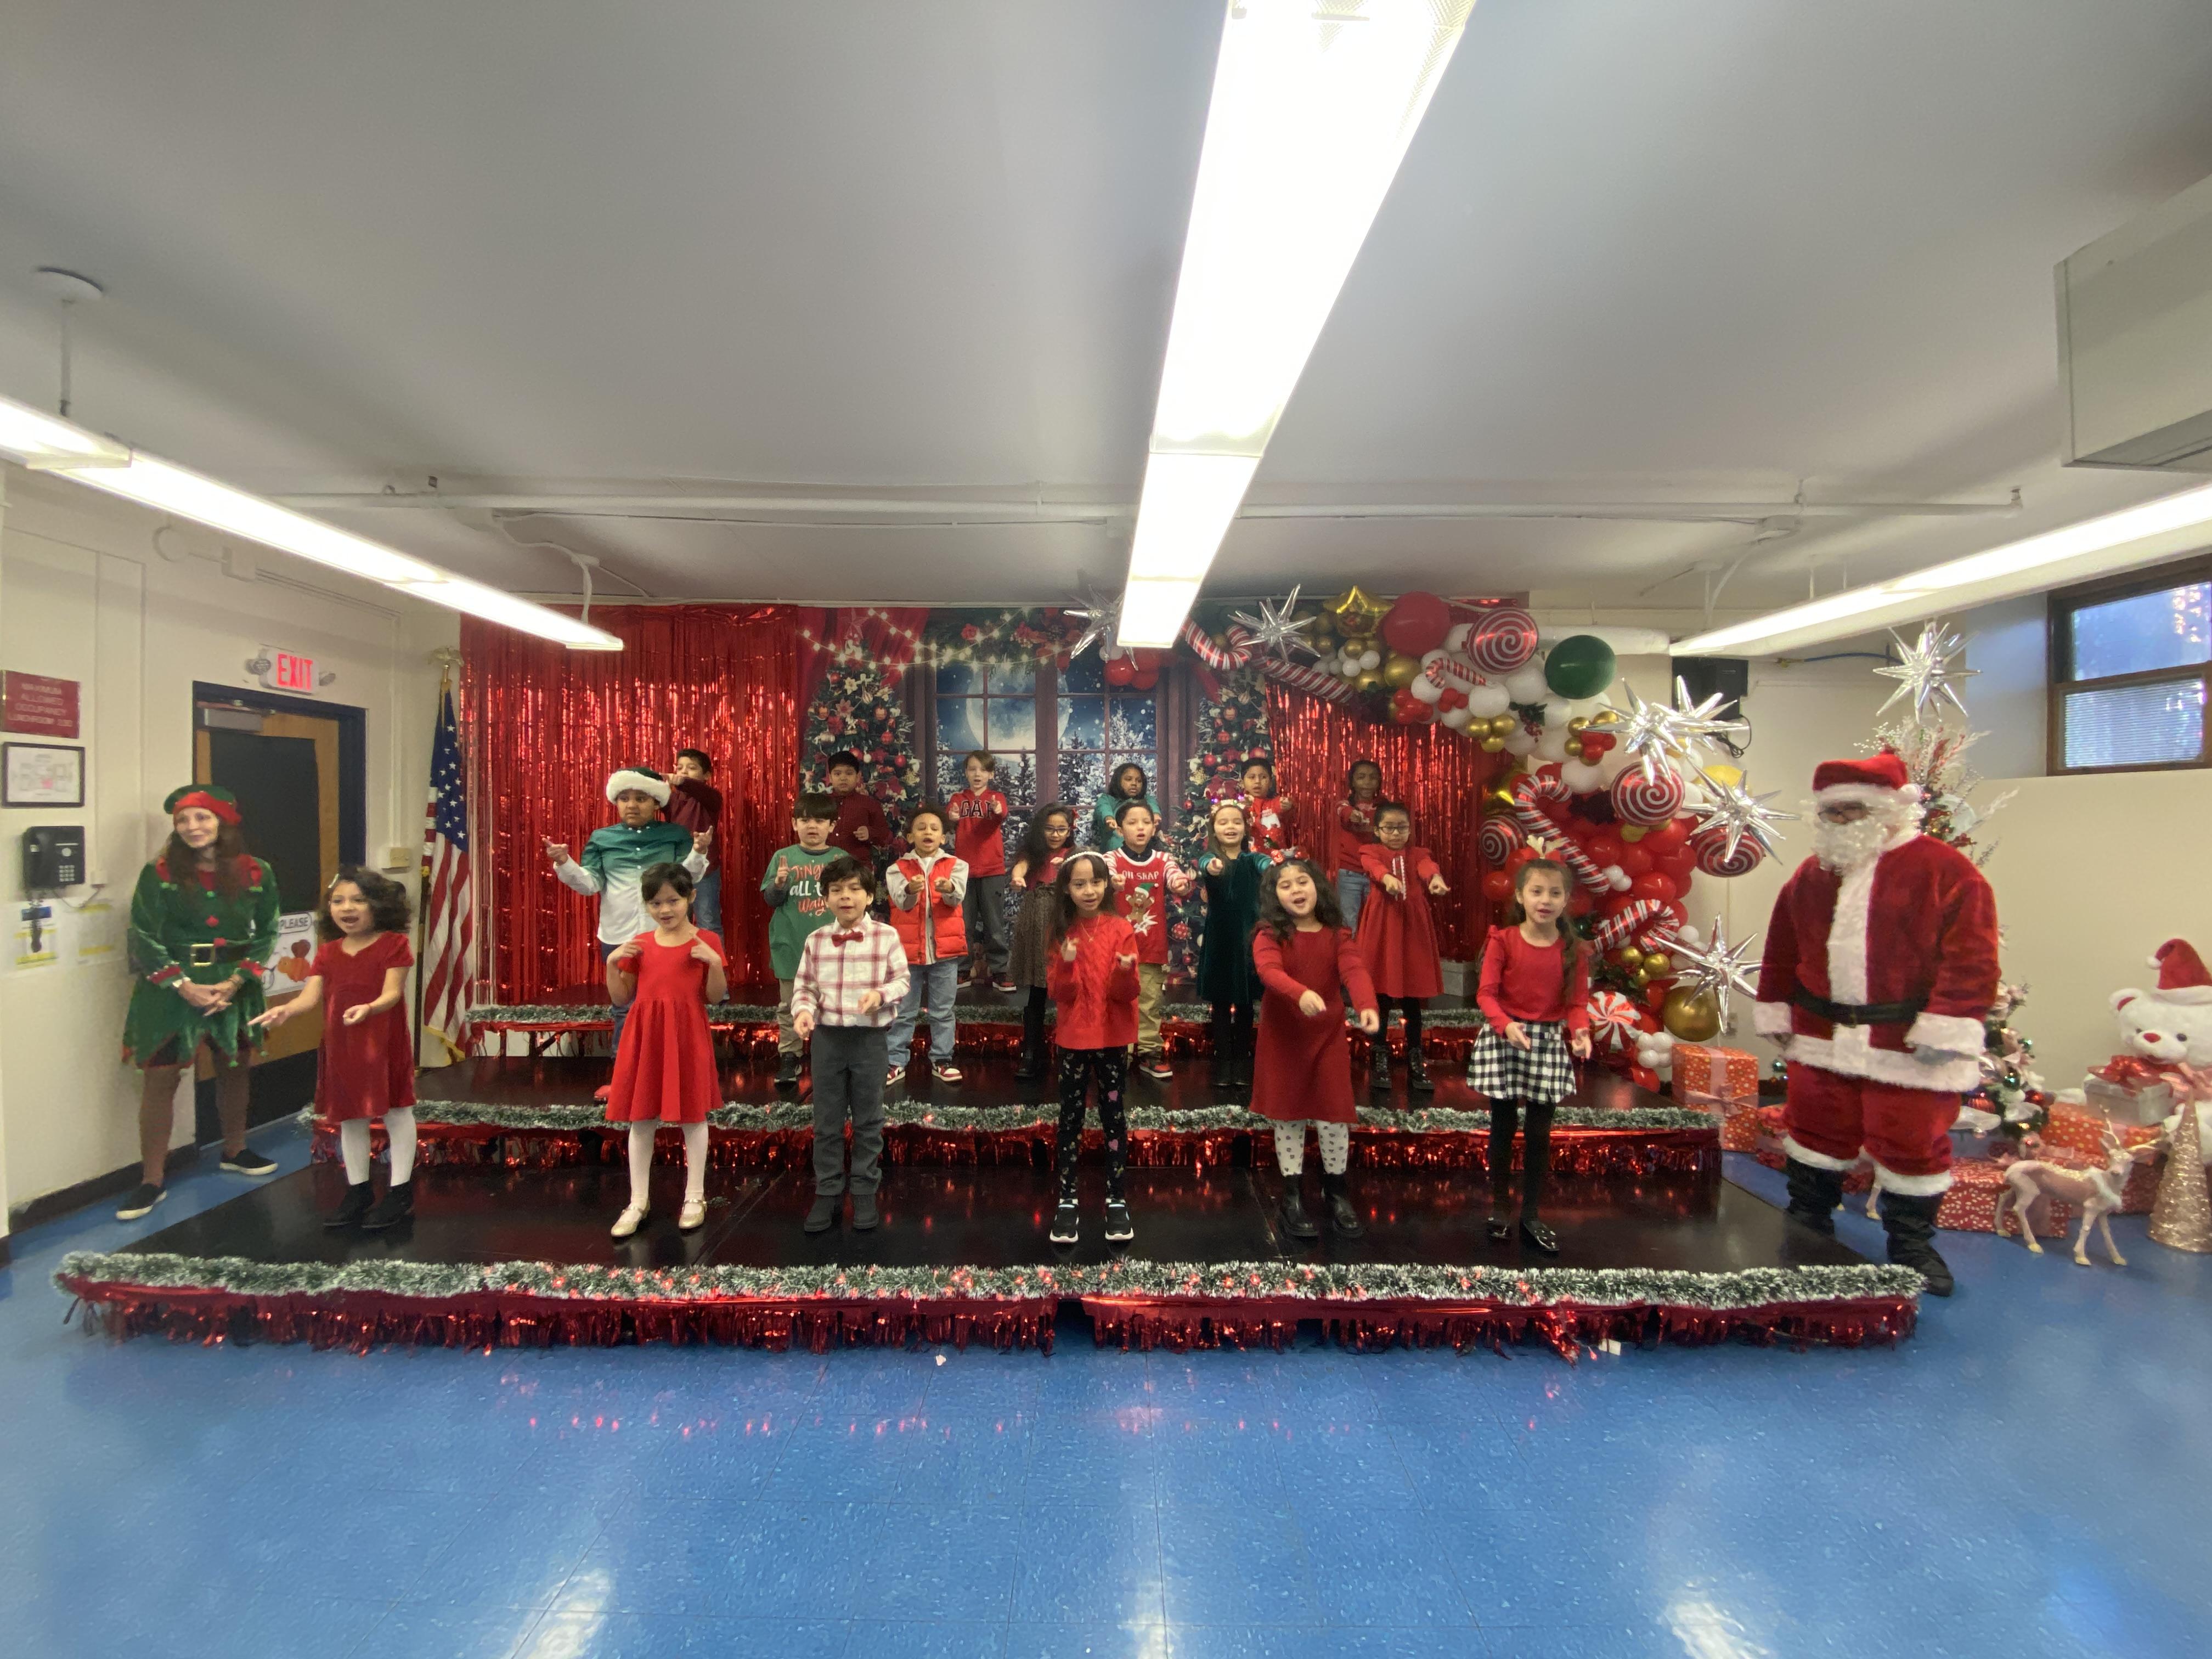 Concluding Holiday Cheer Week at the Jefferson School